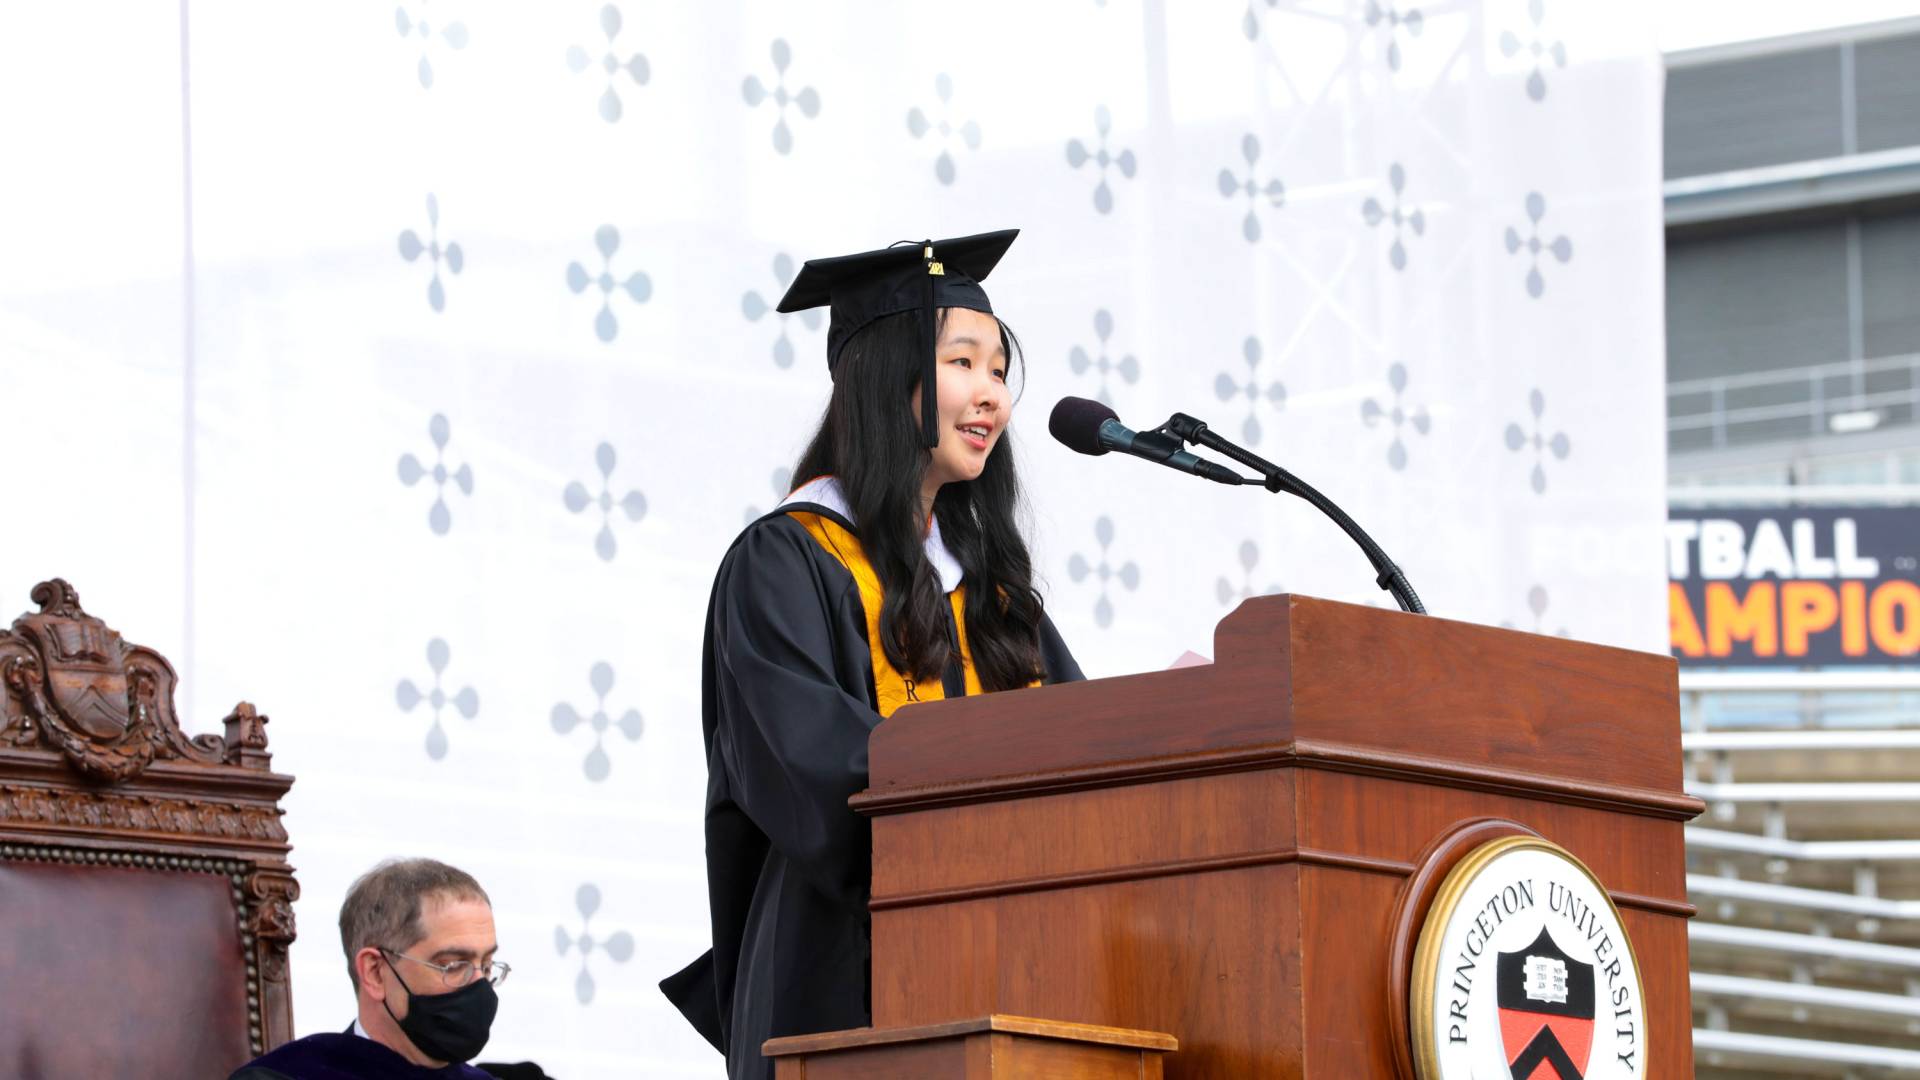 Lucy Wang at the podium